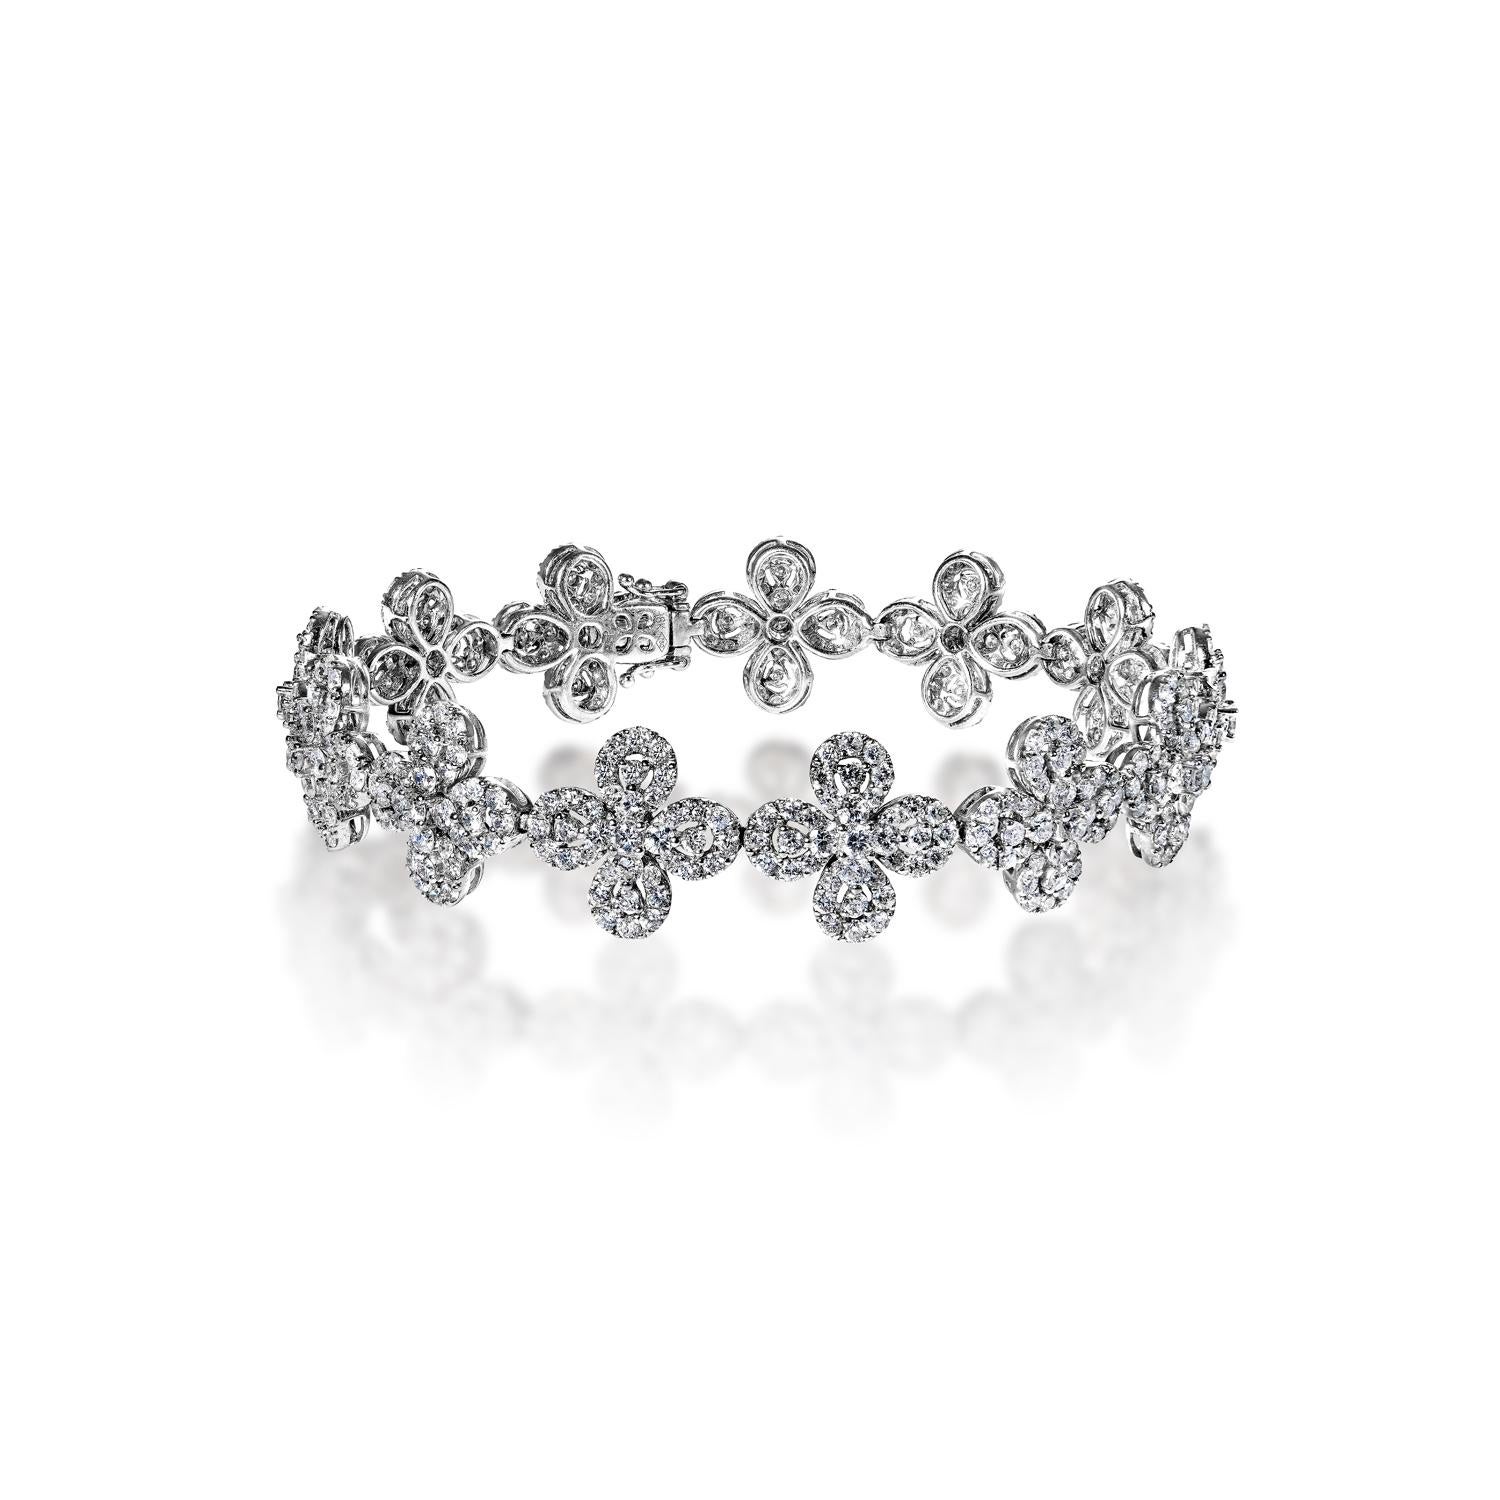 This gorgeous floral design diamond bracelet is exquisitely crafted with 18 karat white gold. Intricately set with 8.76 carats of round brilliant cut diamonds, this stylish piece adds an elegant touch to any outfit. Carefully secured with a box